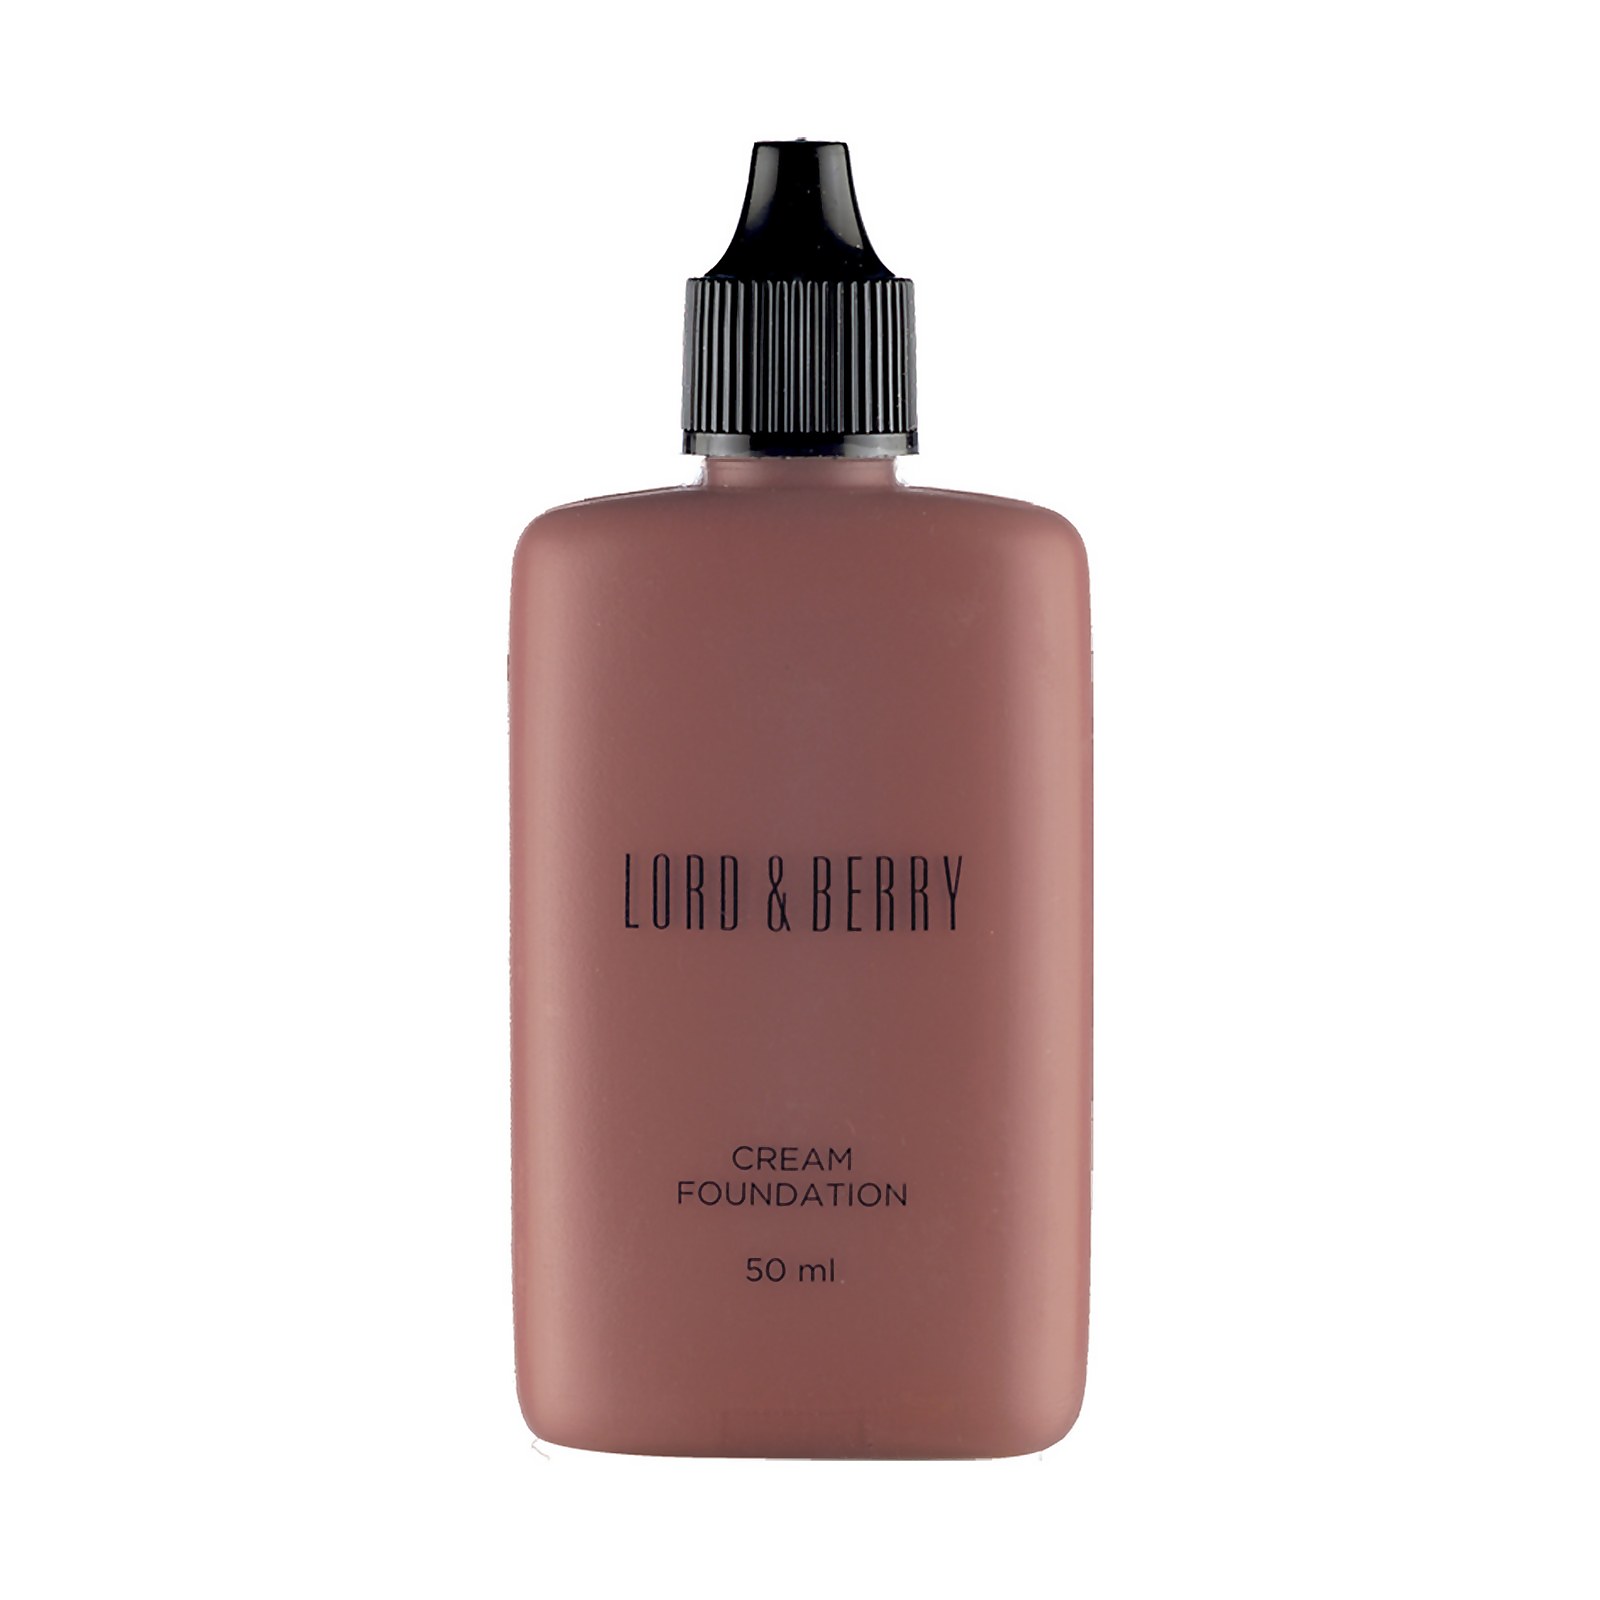 Lord & Berry Cream Foundation 50ml (Various Shades) - Truffle von Lord & Berry